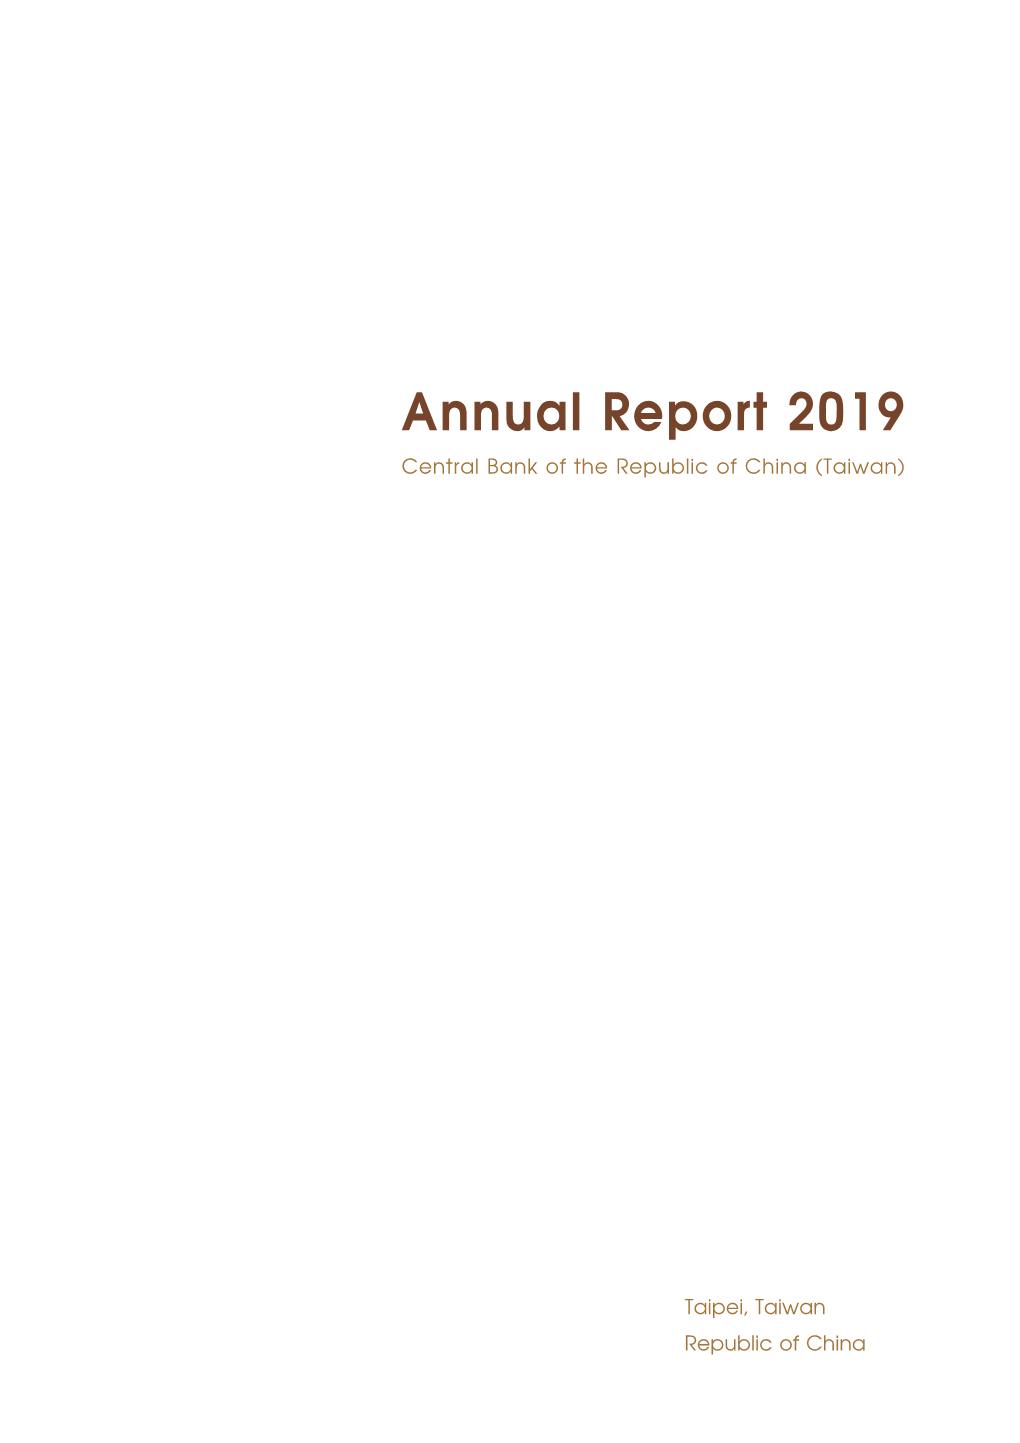 Annual Report 2019 Central Bank of the Republic of China (Taiwan)